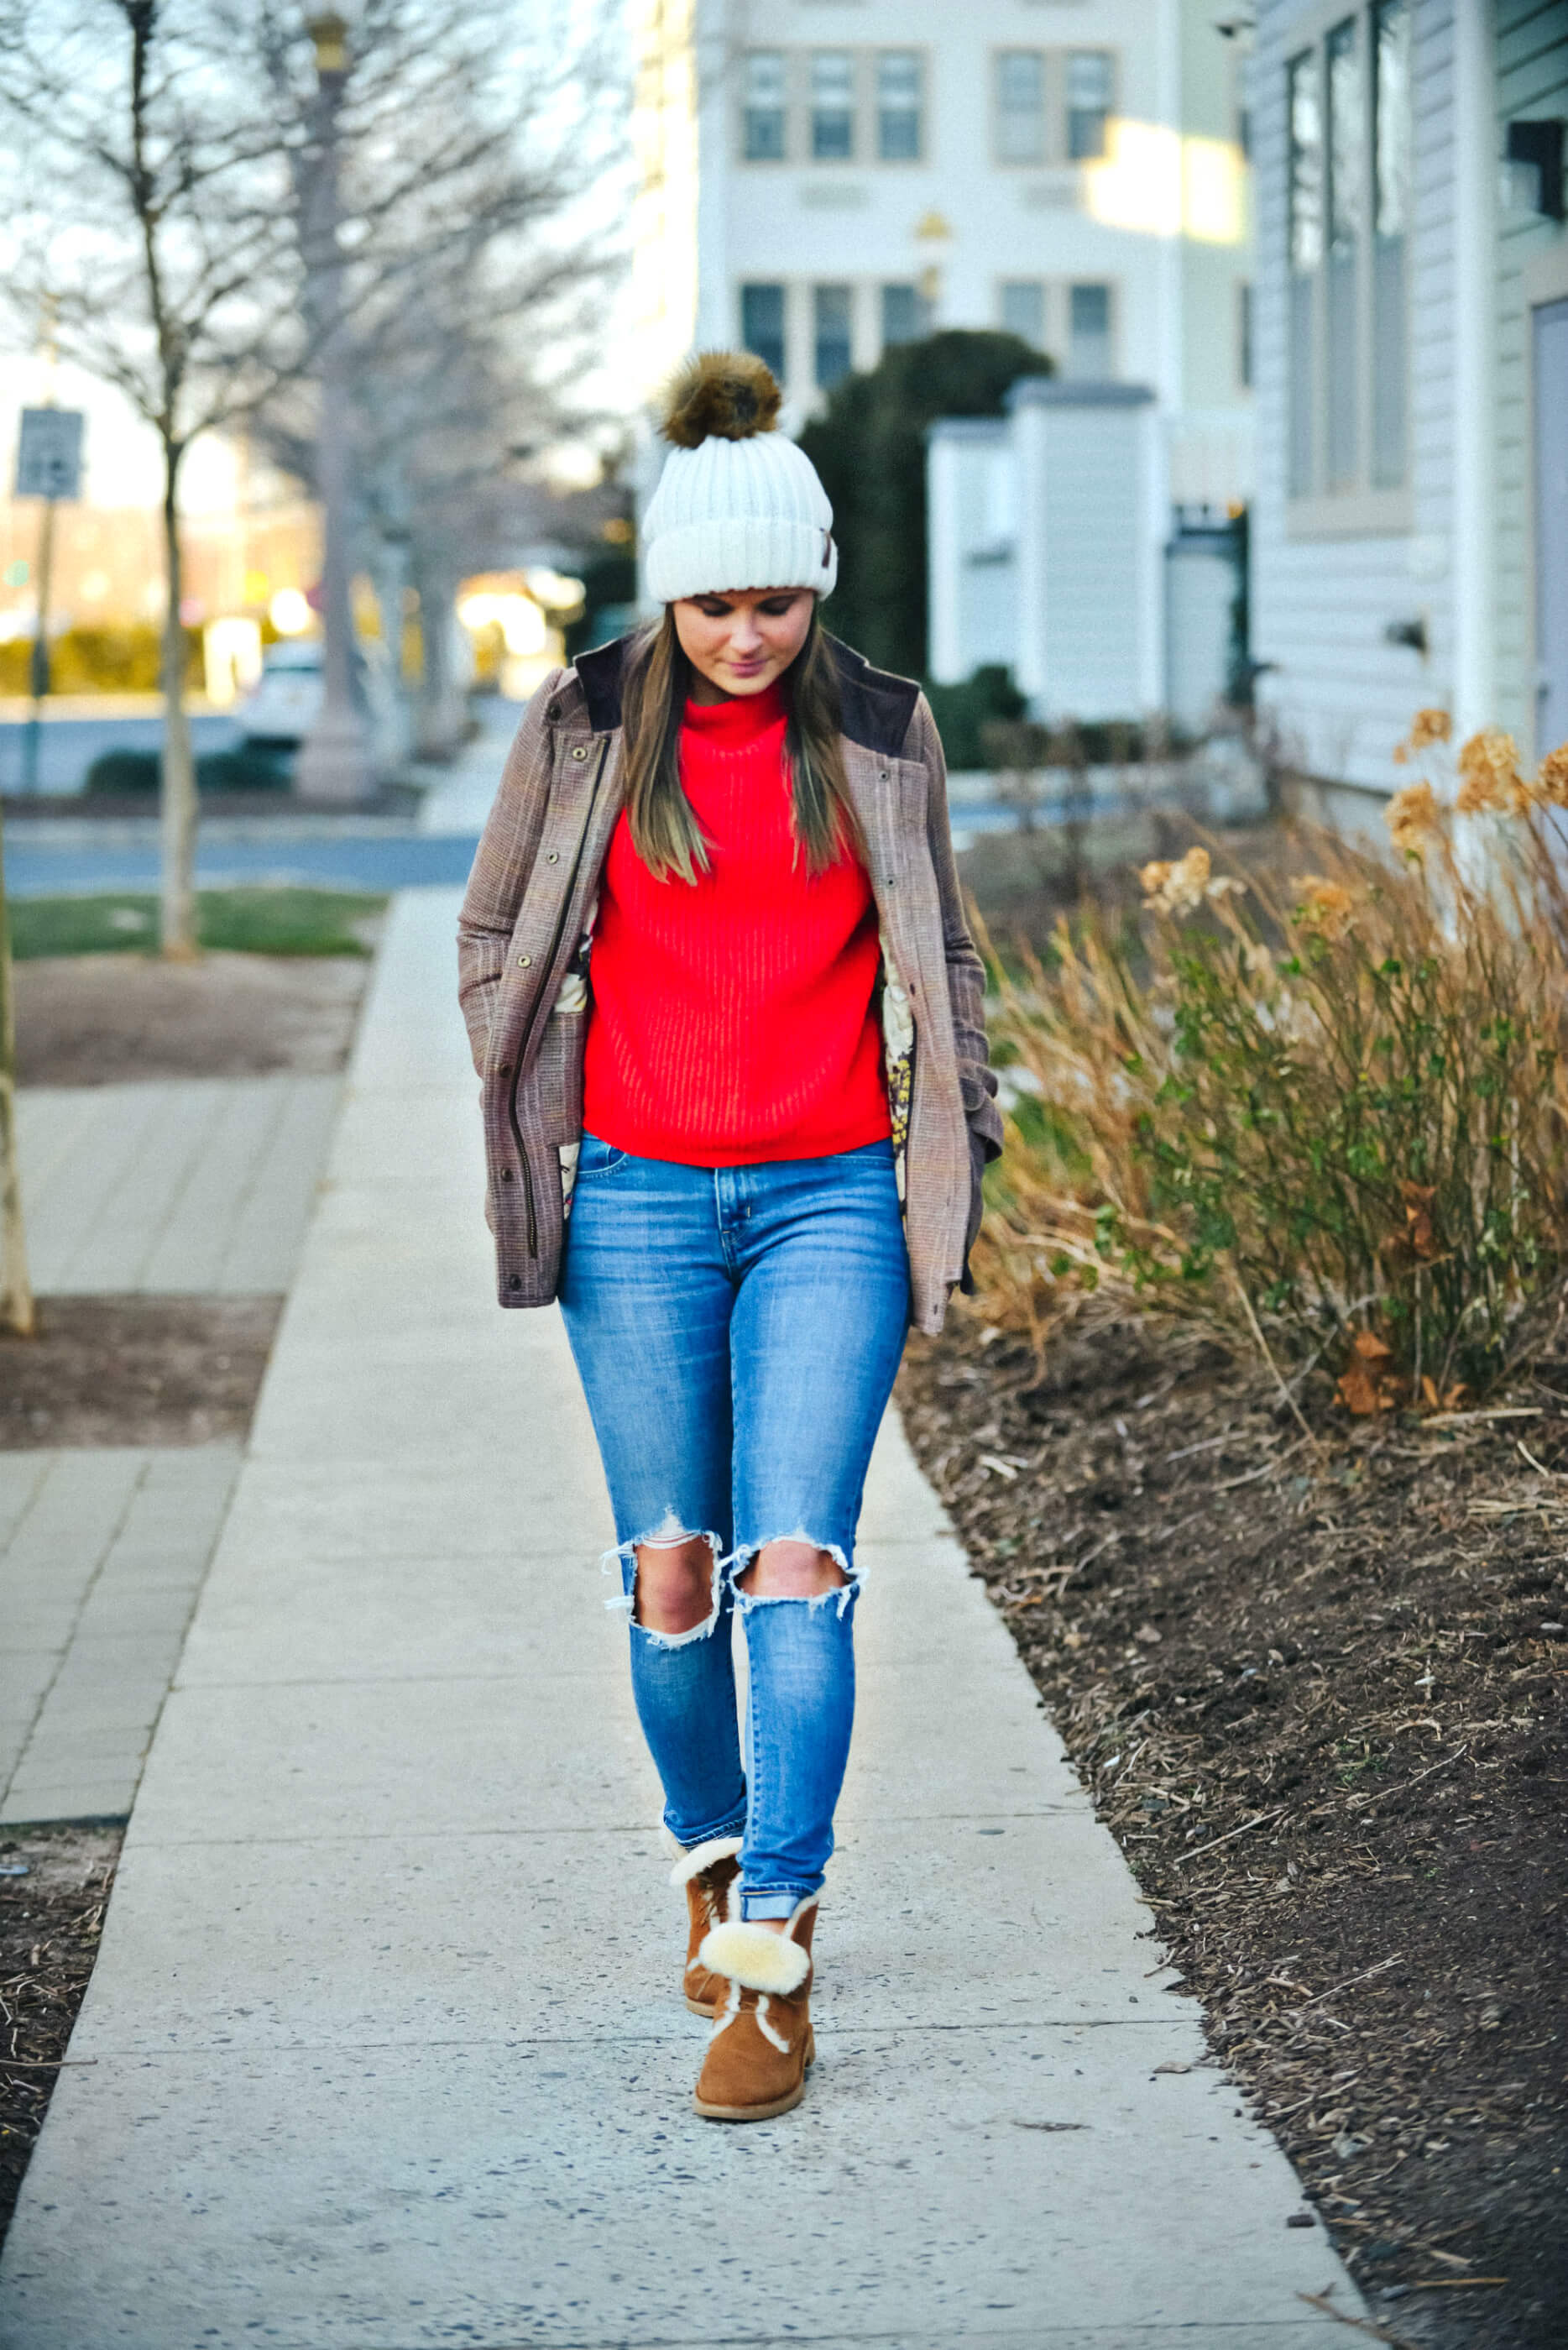 Joules Tweed Fieldcoat, Levi's 721 Denim, Pom Beanie, Winter Outfit, UGG Boots, Tilden of To Be Bright